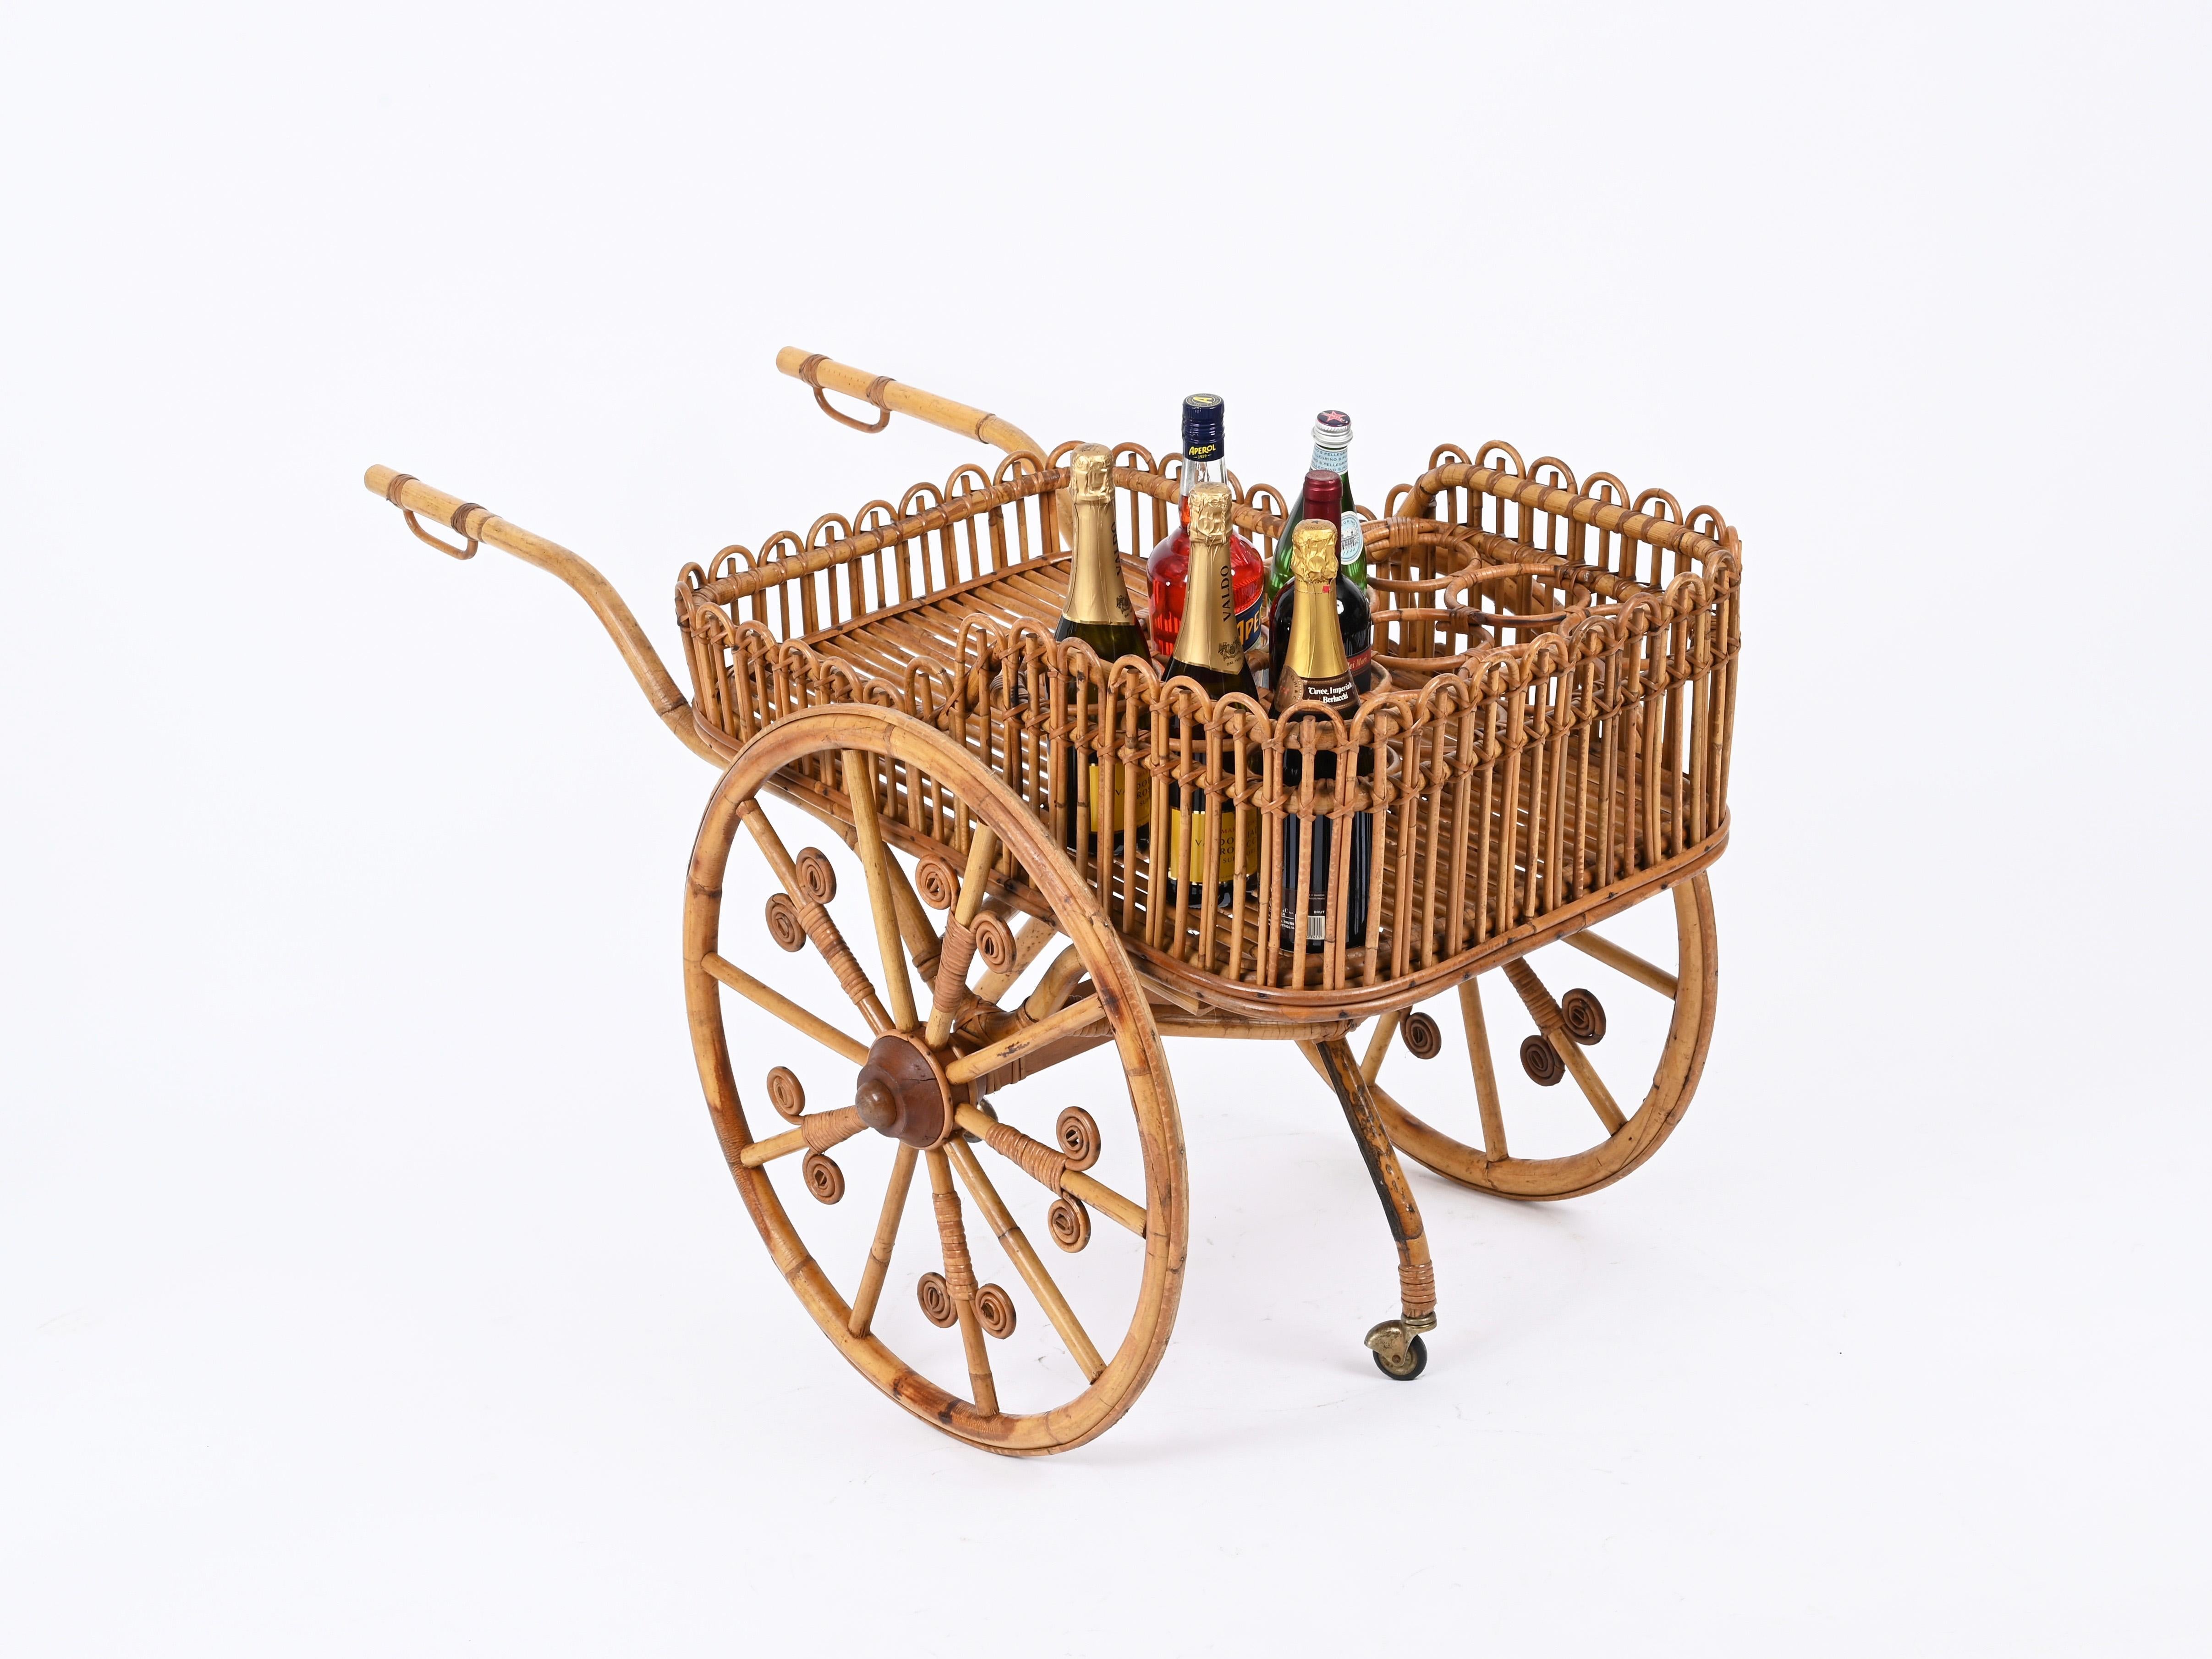 French Riviera Serving Bar Cart in Rattan, Bamboo and Wicker, Italy 1960s For Sale 5